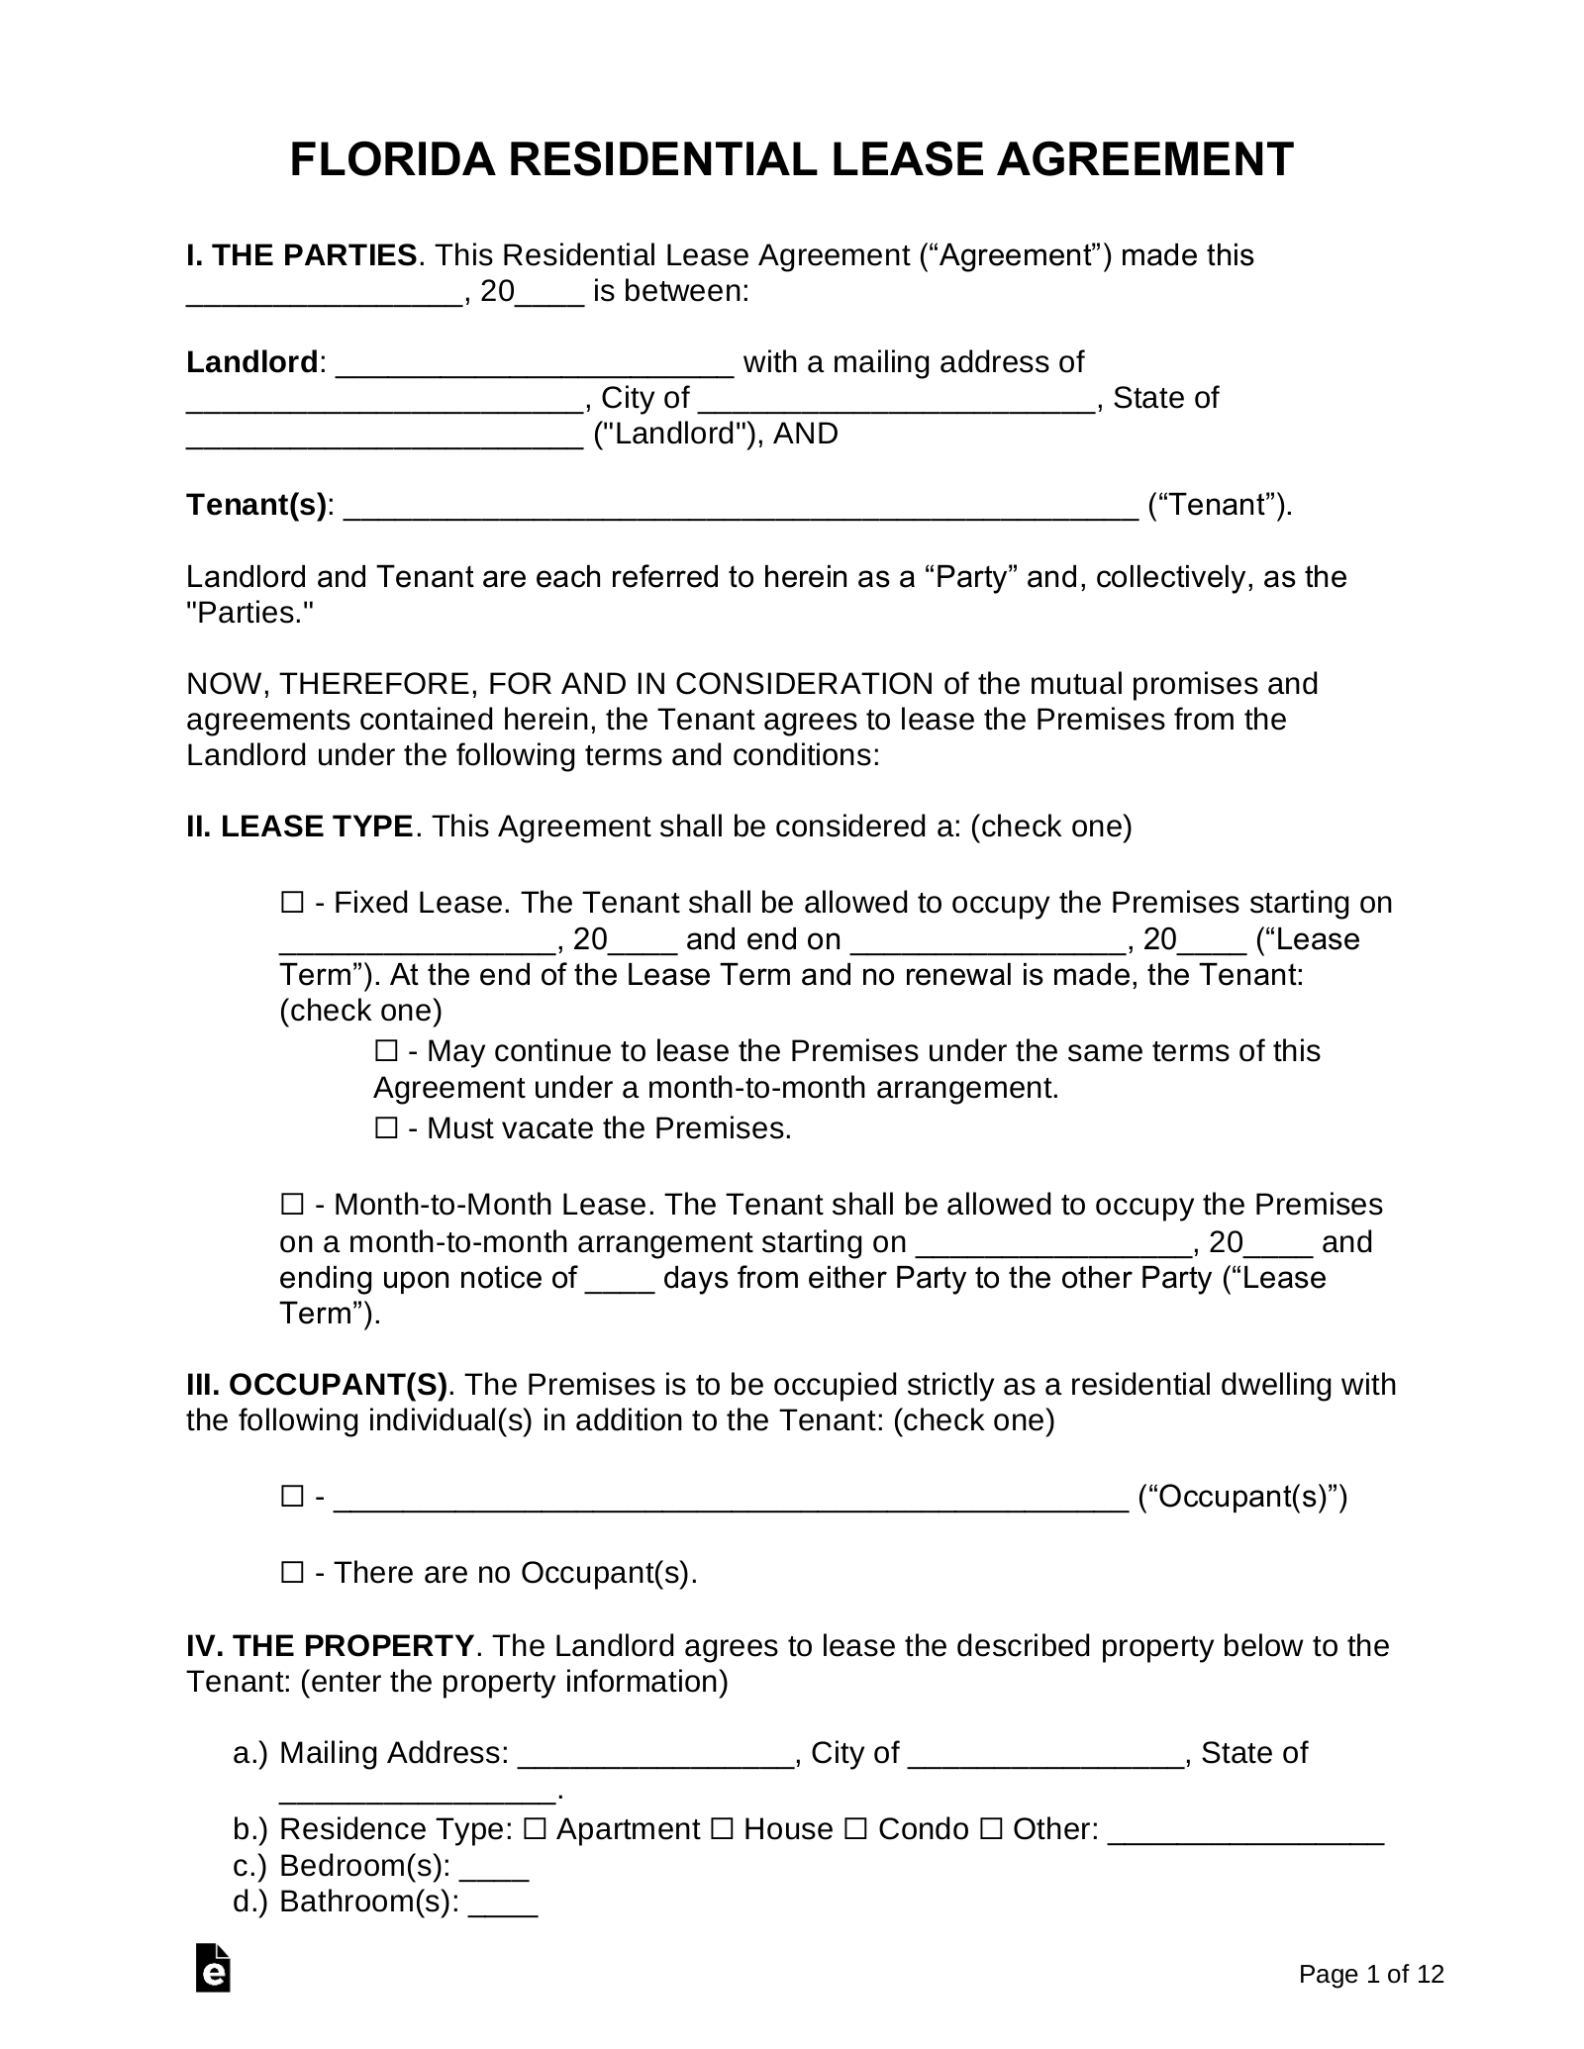 Free Florida Standard Residential Lease Agreement Template - Word | Pdf regarding Yearly Rental Agreement Template